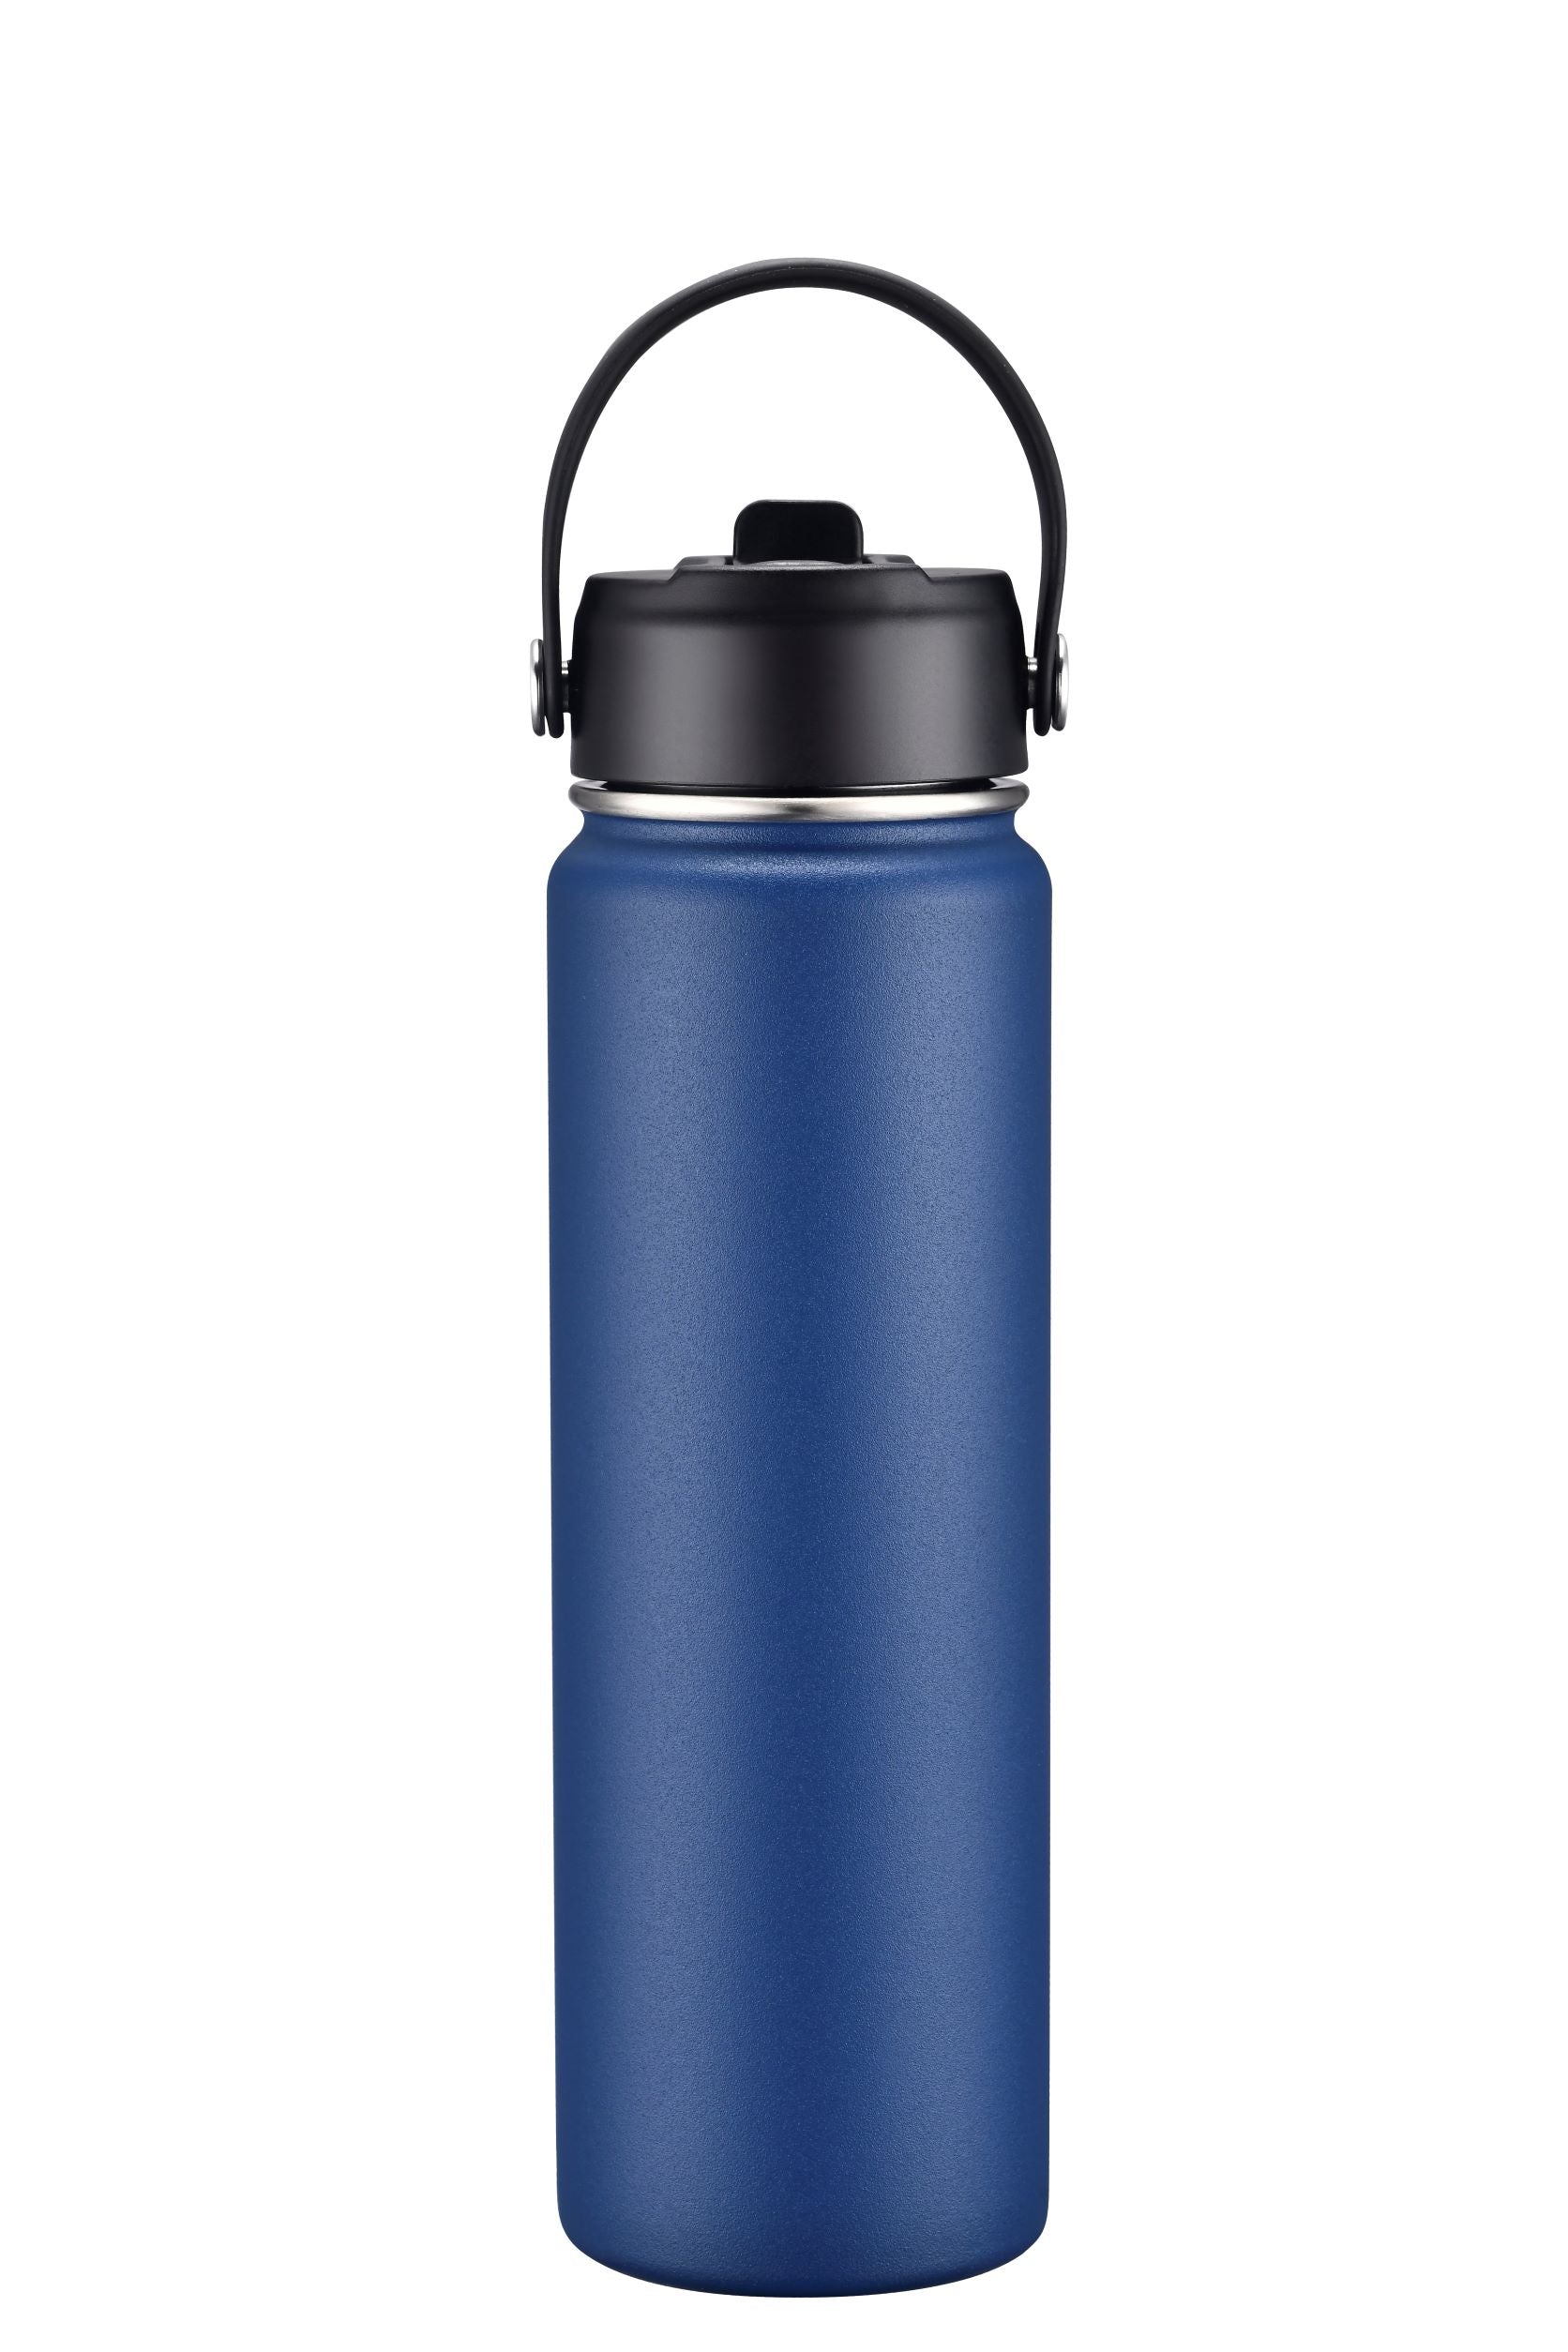 LS-908 - 27oz Vacuum Water Bottle with Silicone Bottom